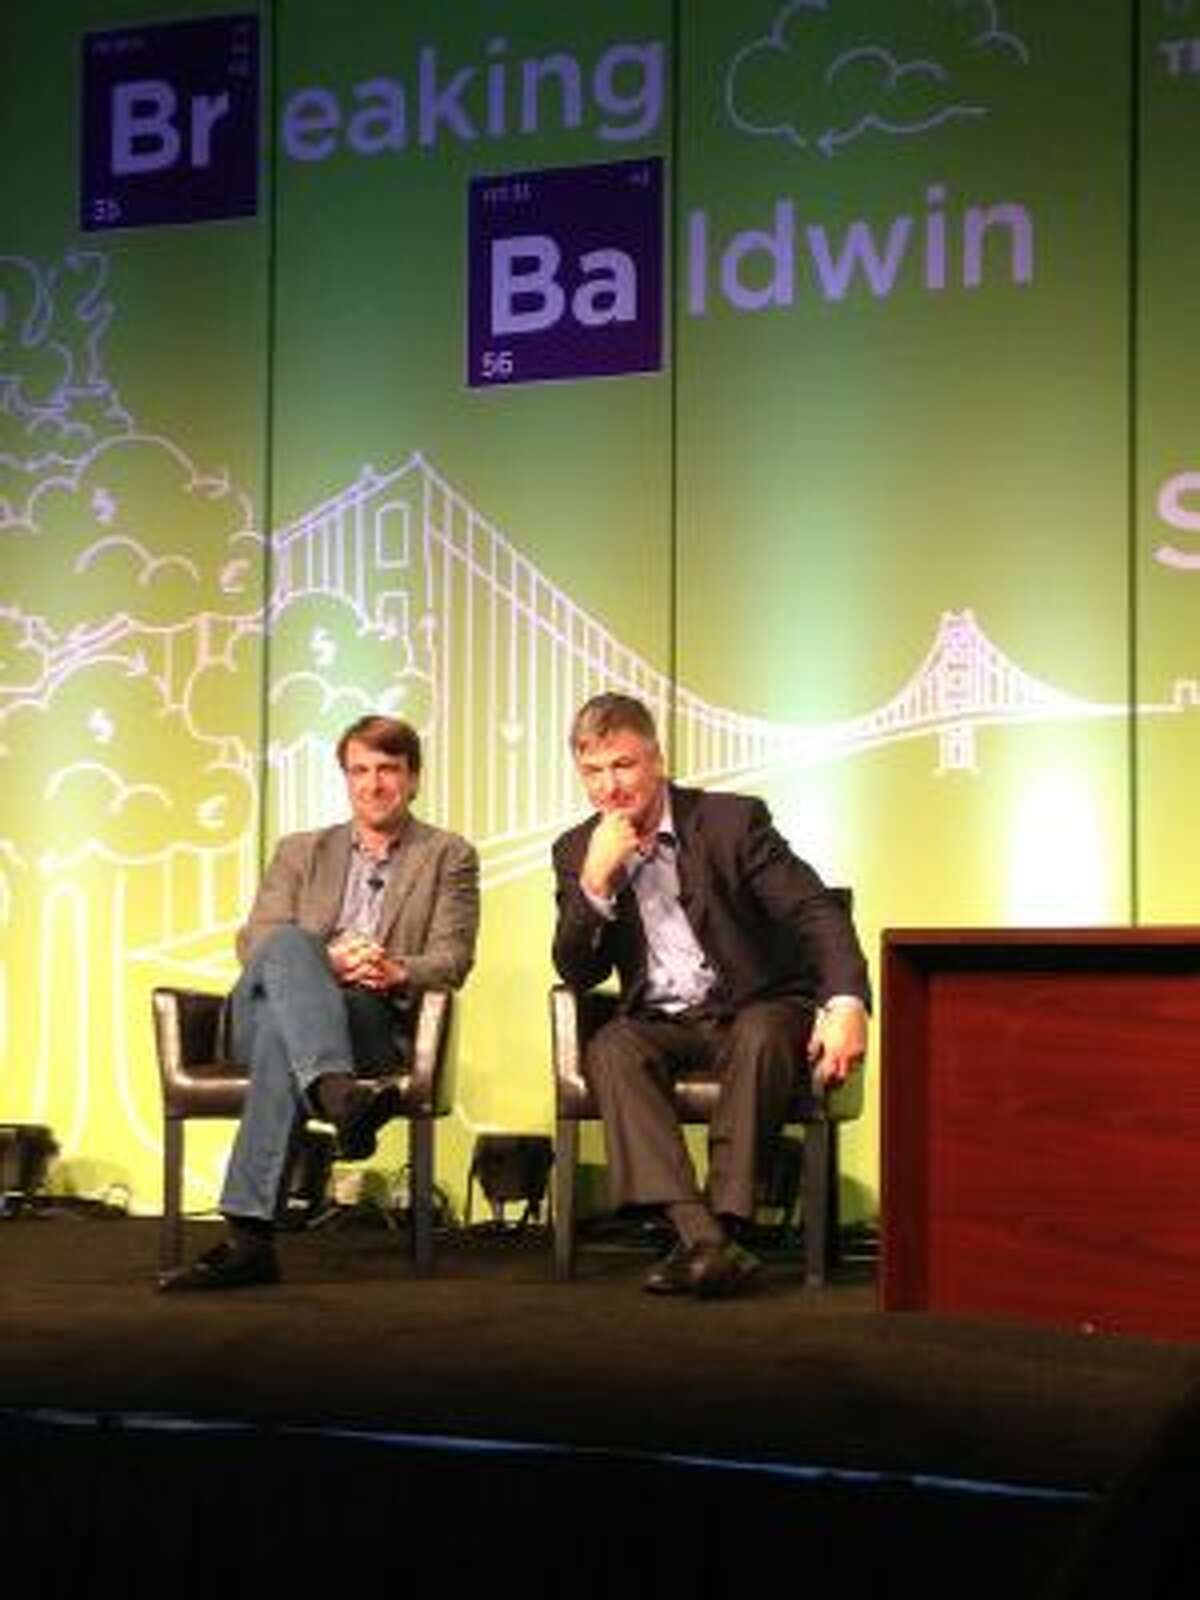 ServiceSource CEO Michael Smerklo, left, and actor, Alec Baldwin, attend a technology presentation on Nov. 20, 2013, in San Francisco.